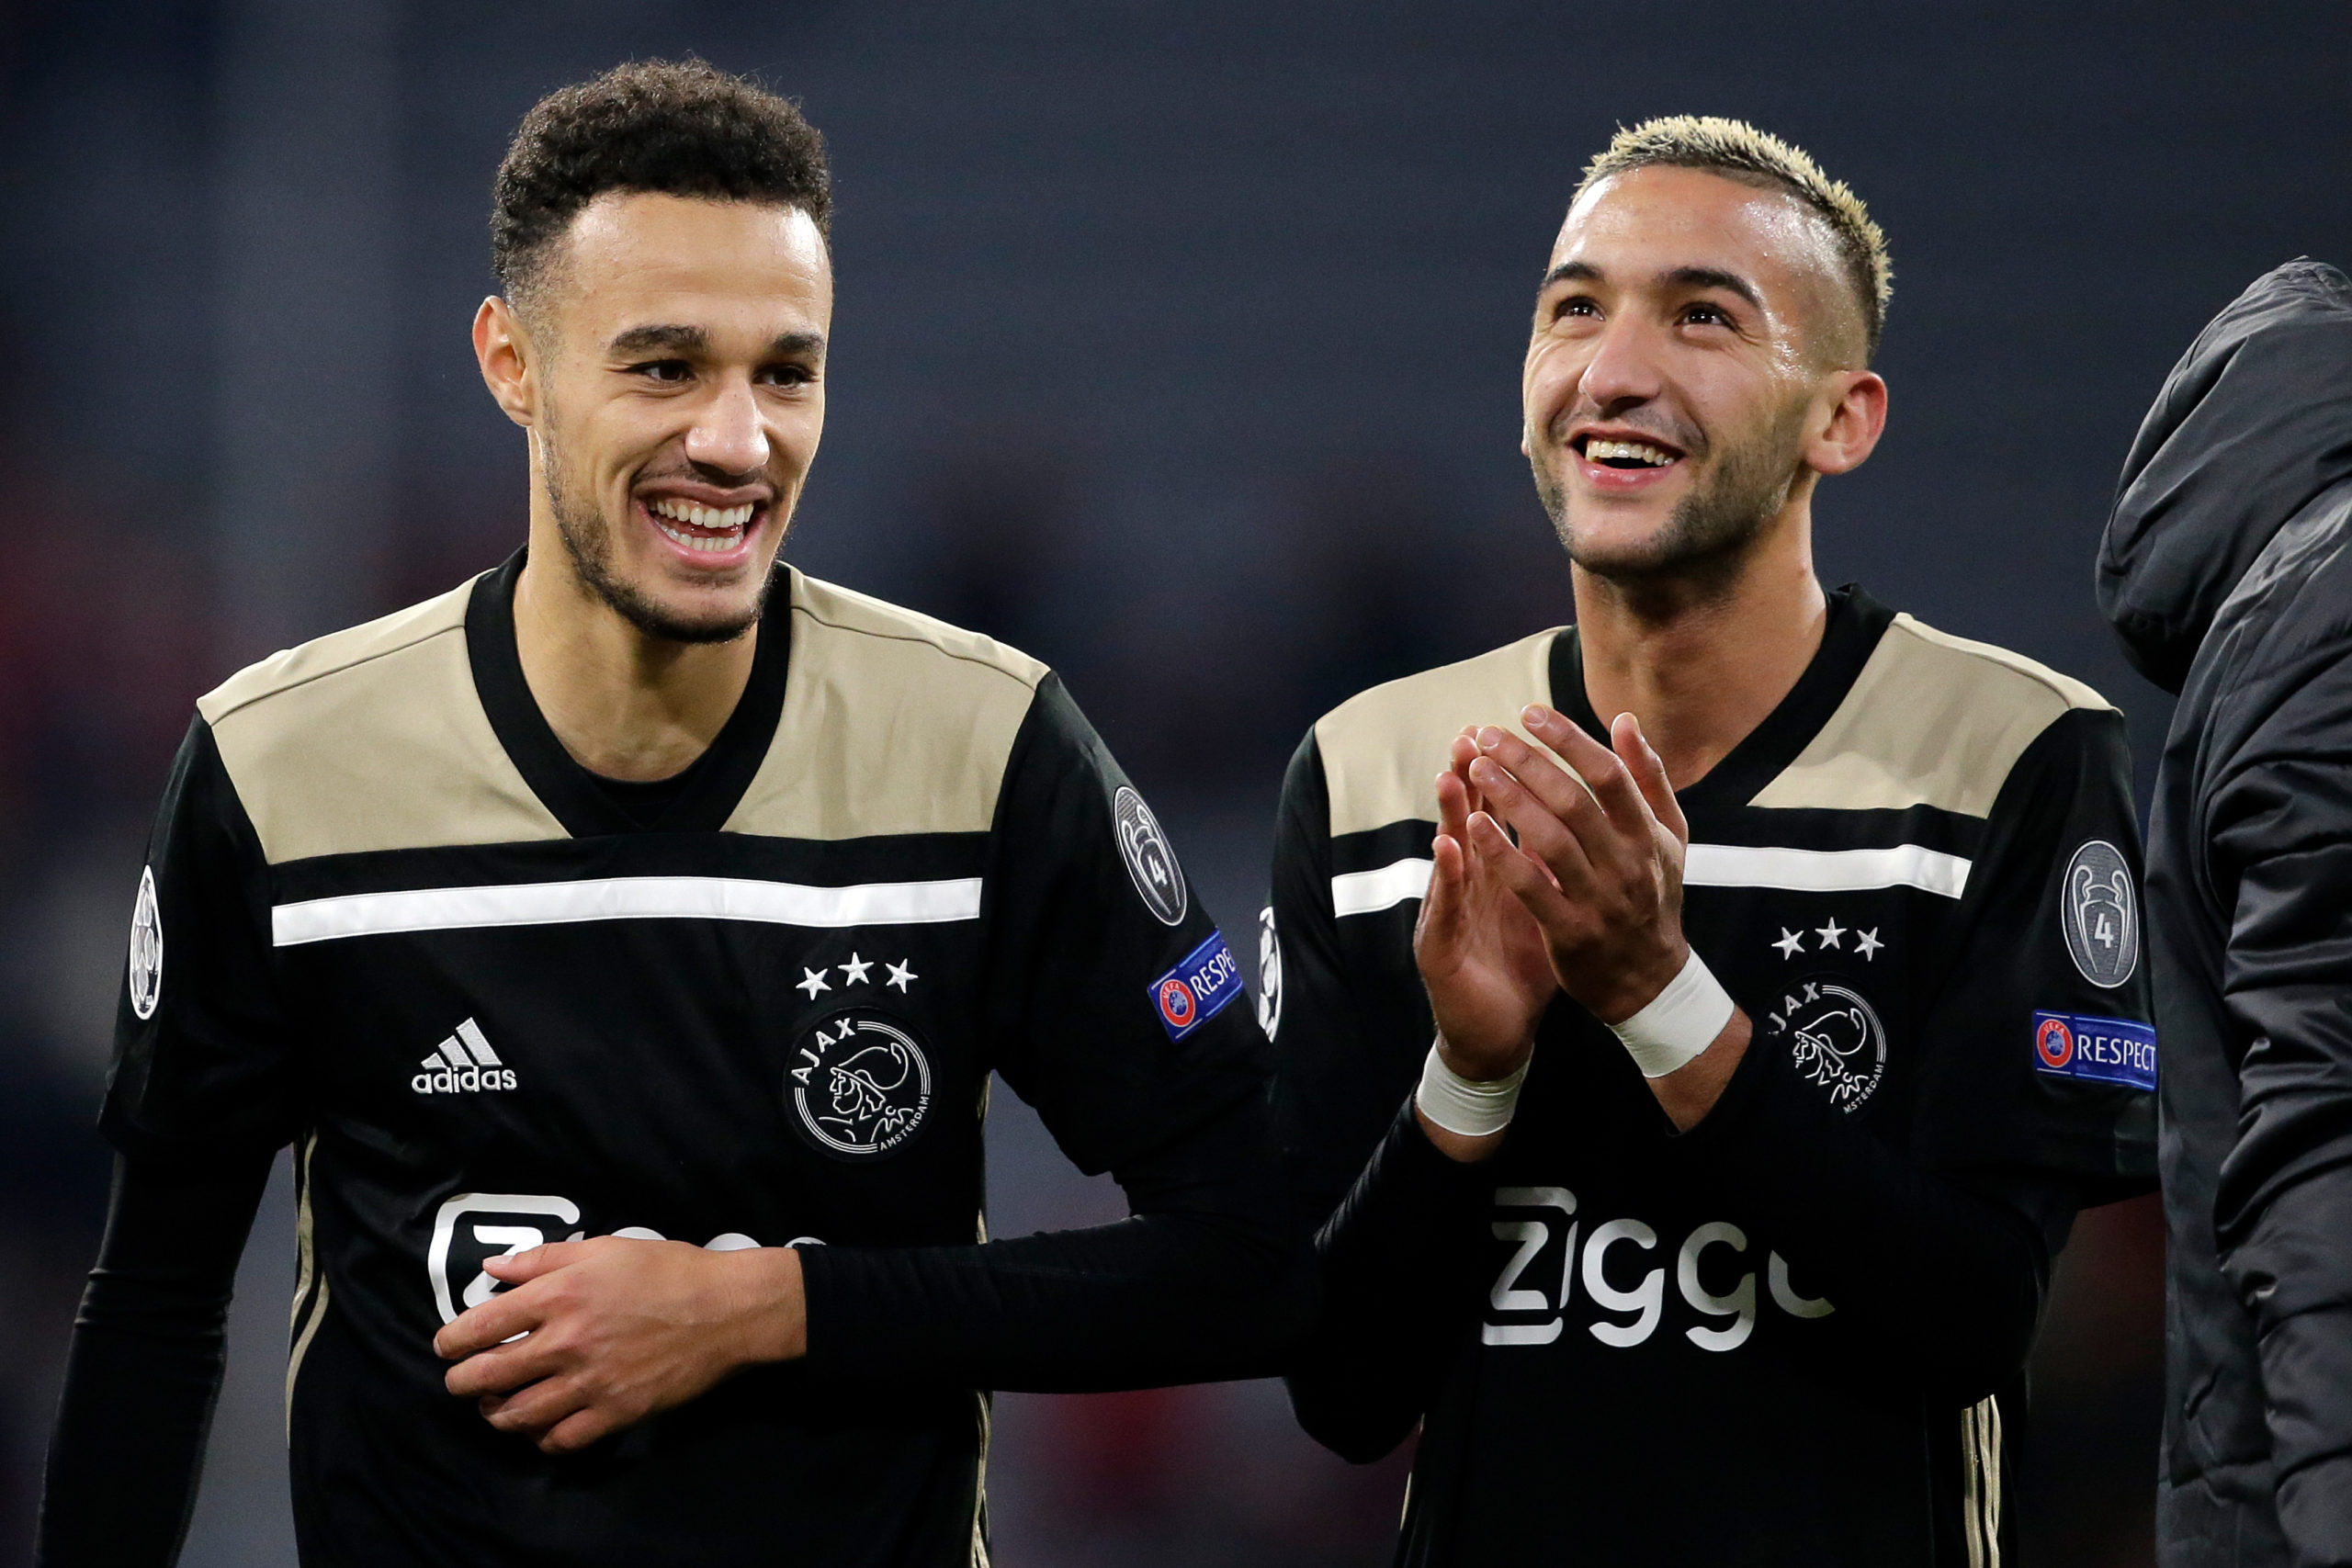 MUNICH, GERMANY - OCTOBER 2: (L-R) Hakim Ziyech of Ajax, Noussair Mazraoui of Ajax celebrates the victory during the UEFA Champions League match between Bayern Munchen v Ajax at the Allianz Arena on October 2, 2018 in Munich Germany (Photo by Erwin Spek/Soccrates/Getty Images)